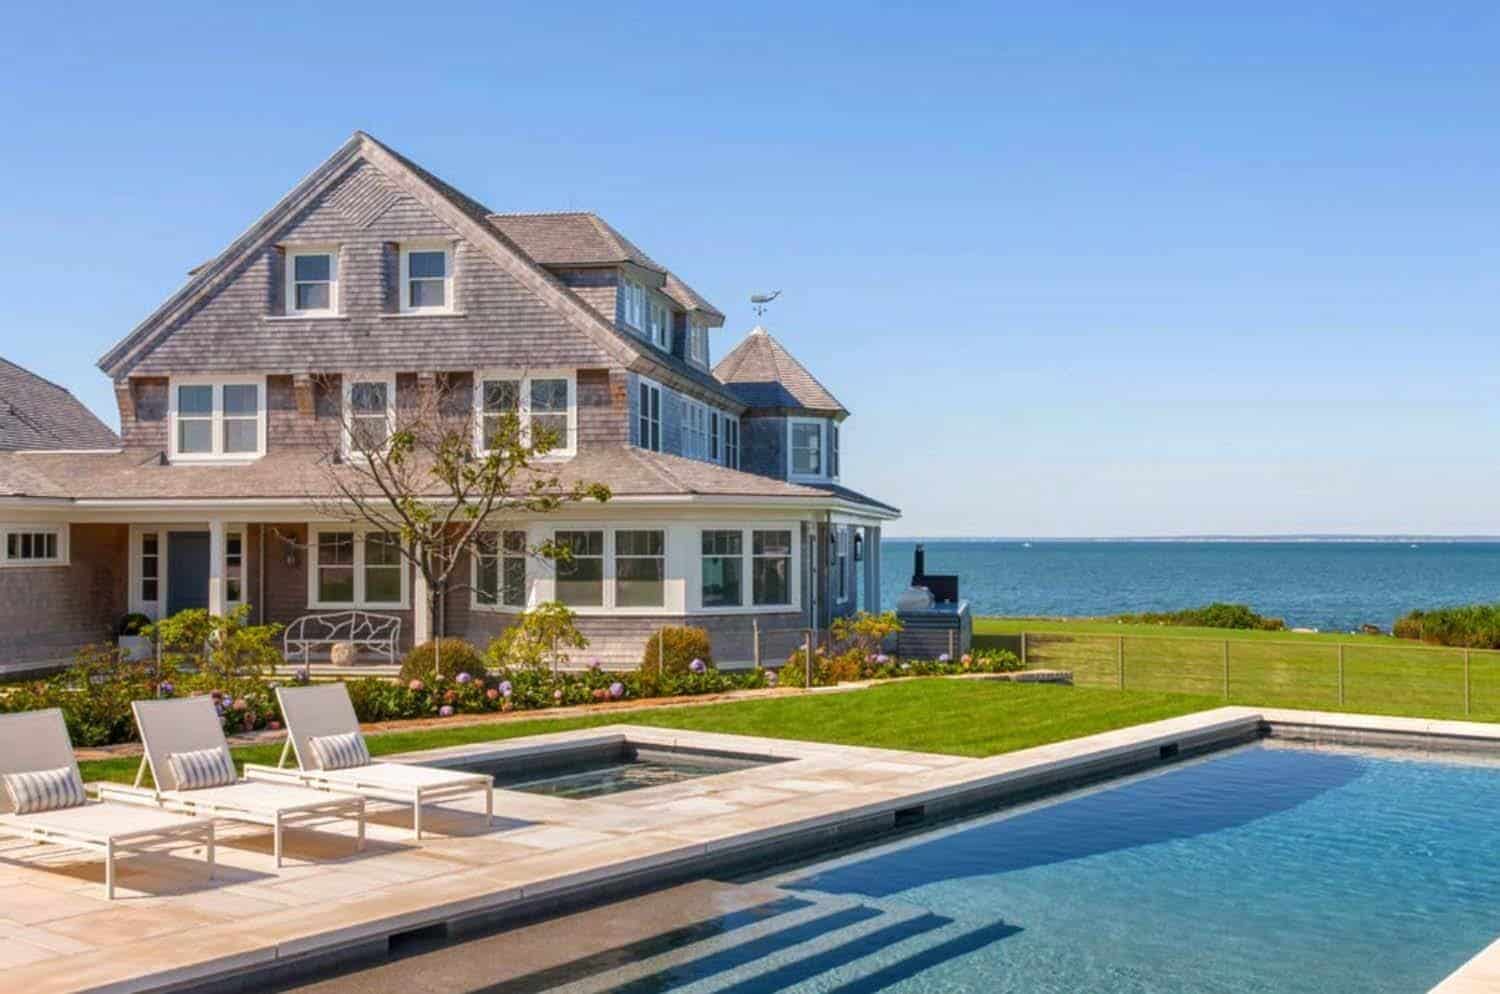 Heirloom cottage converted to seaside dream home in Cape Cod